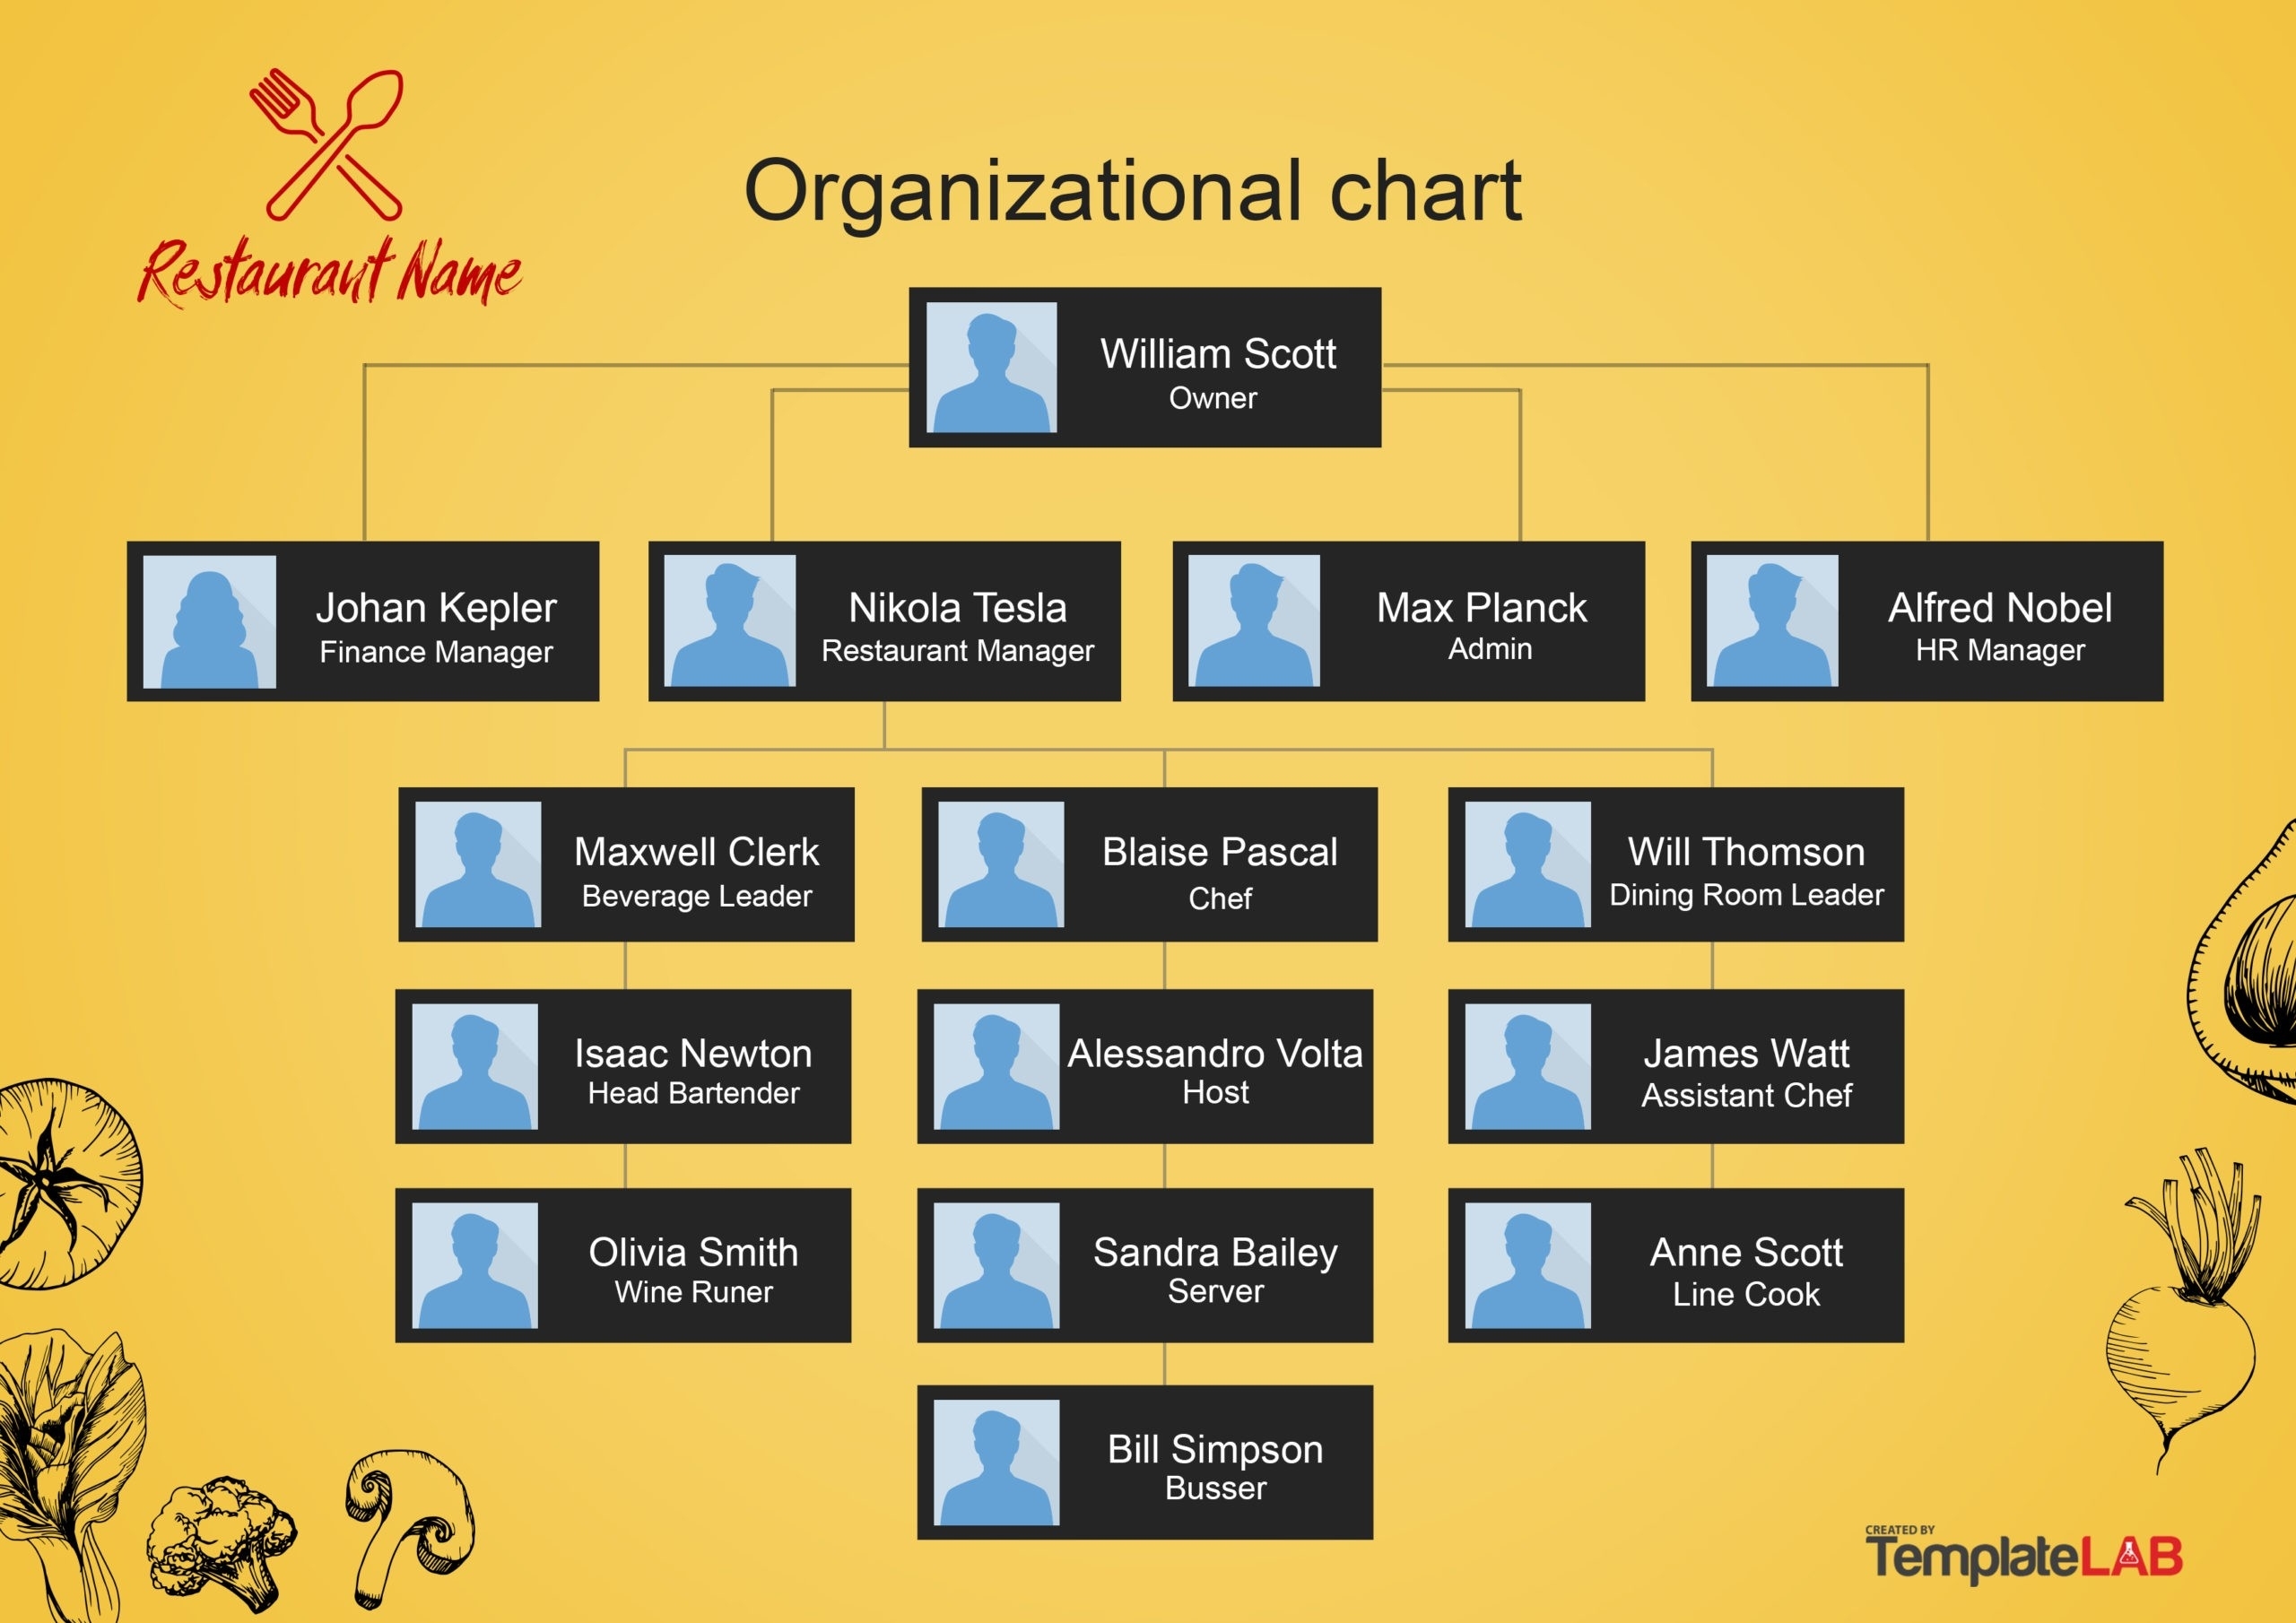 32 Organizational Chart Templates (Word, Excel, Powerpoint, Psd) Pertaining To Organization Chart Template Word